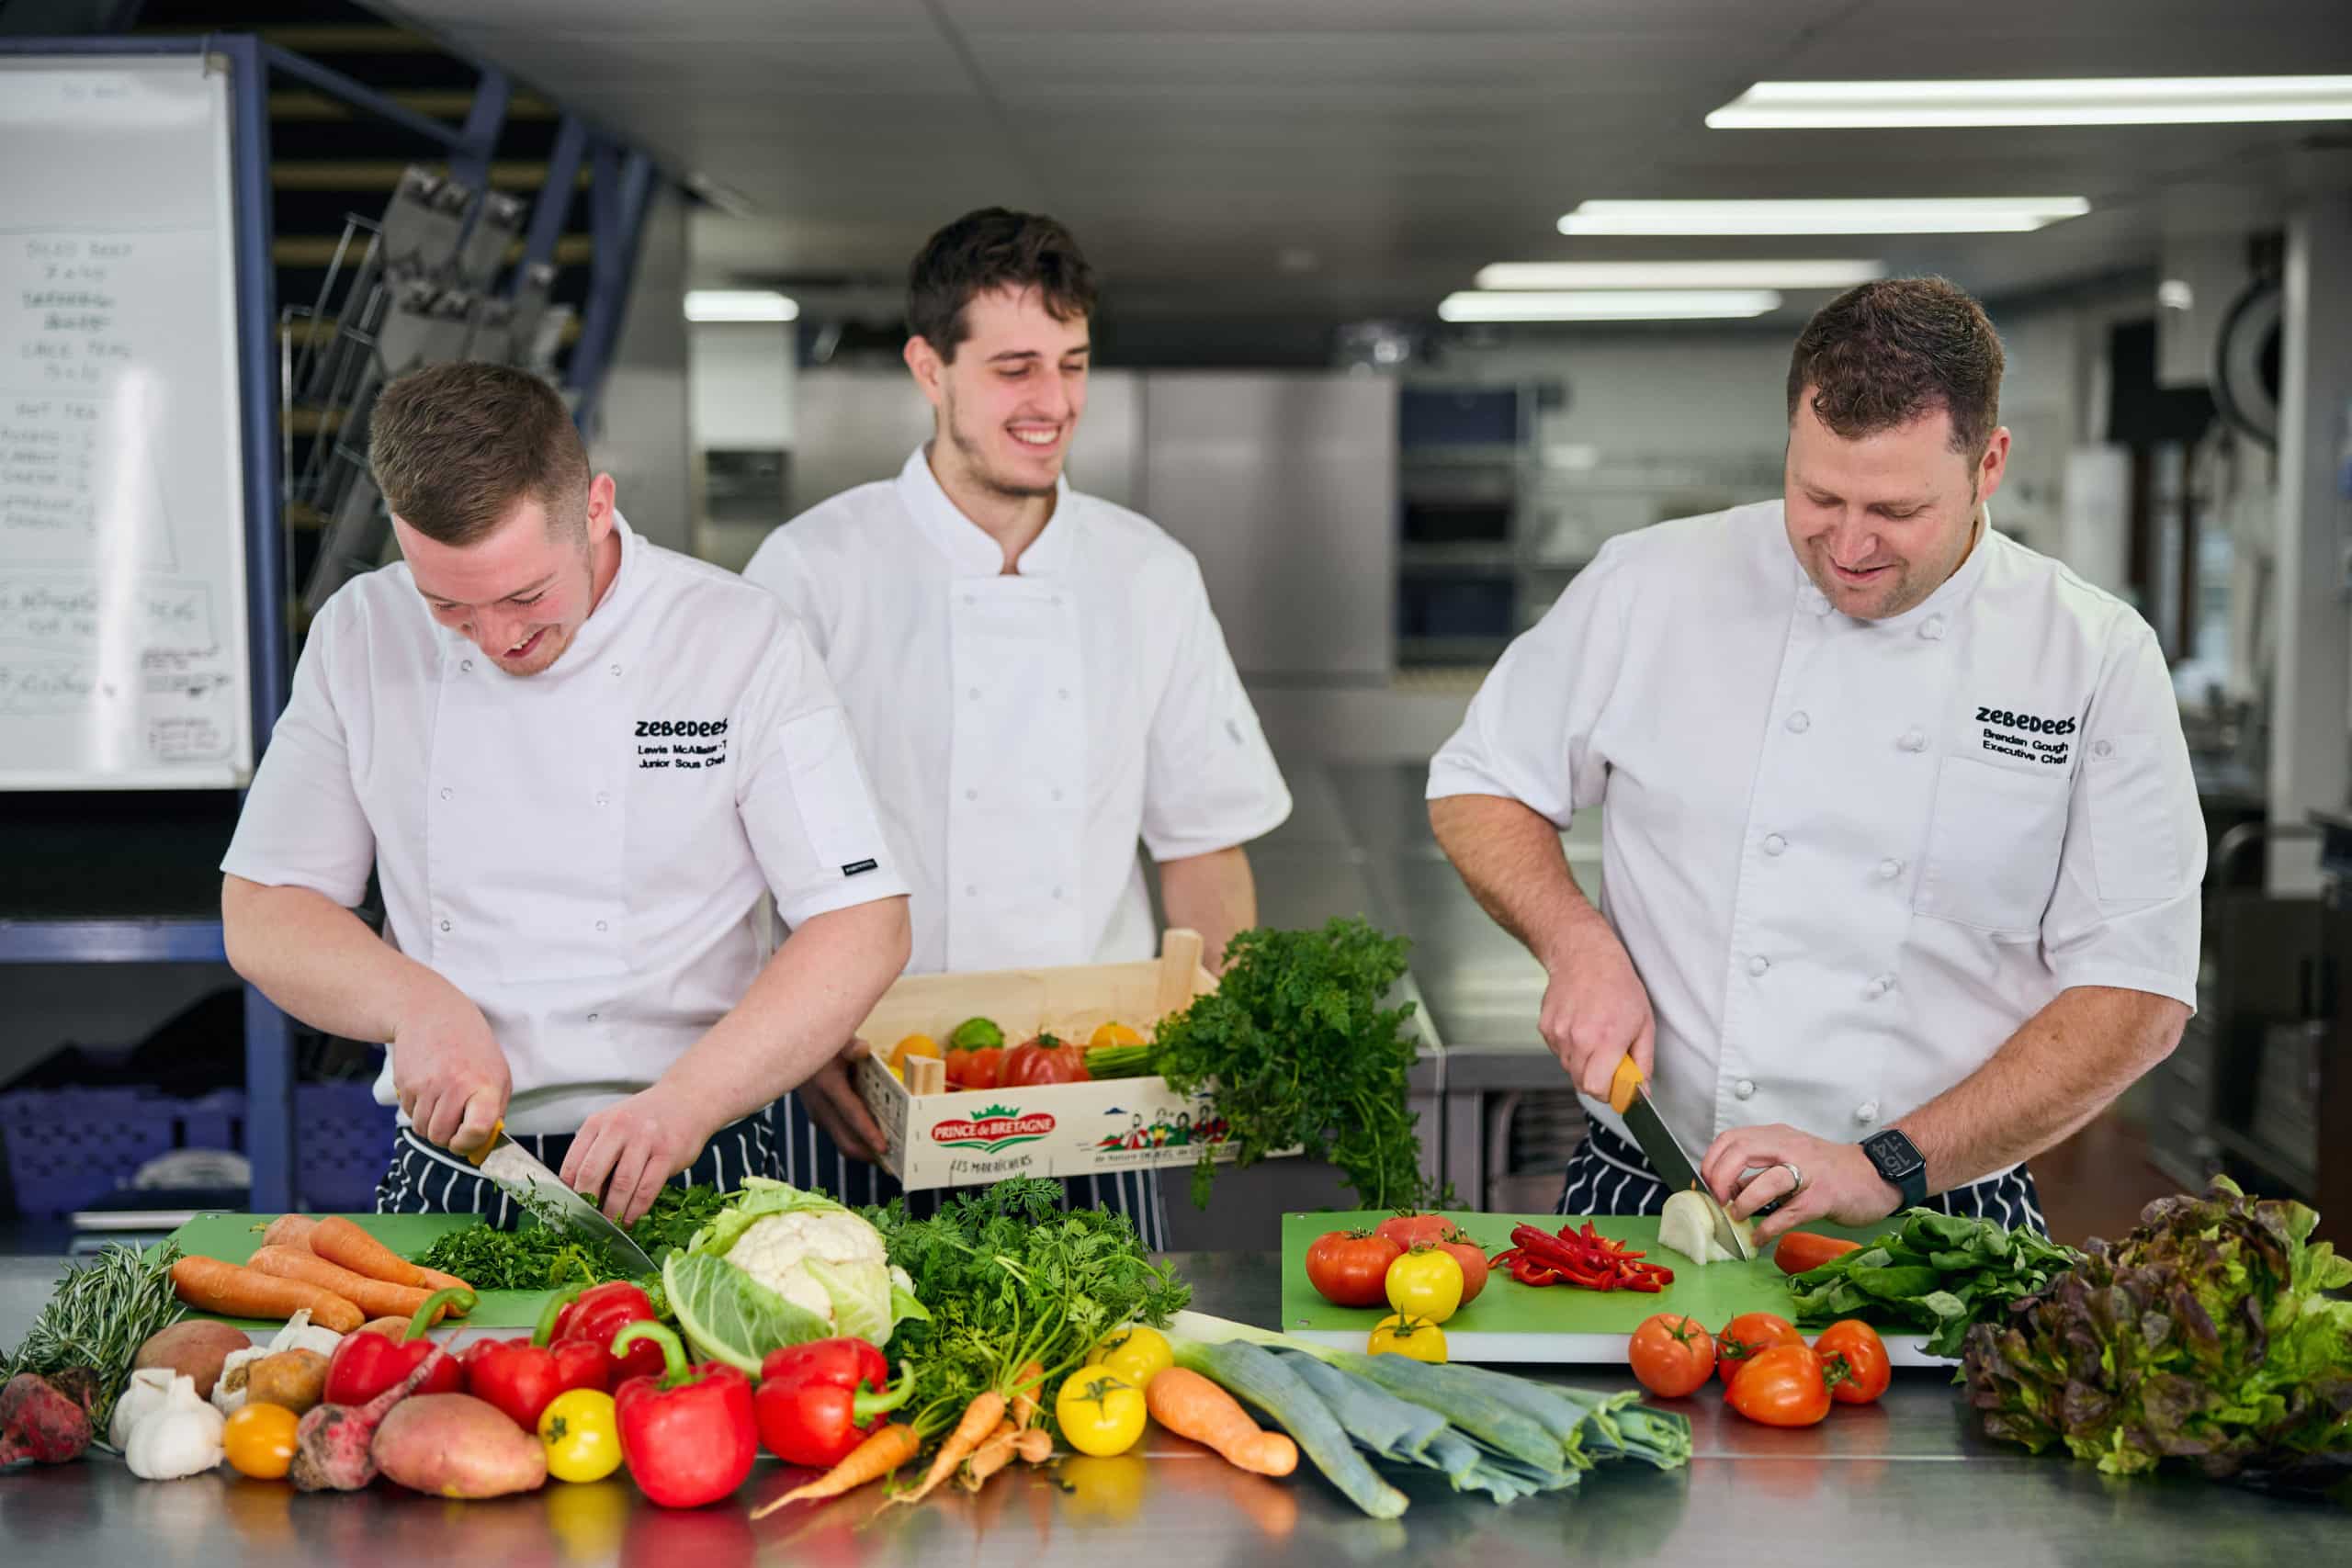 Image of Zebedees chefs chopping fresh, brightly coloured vegetables